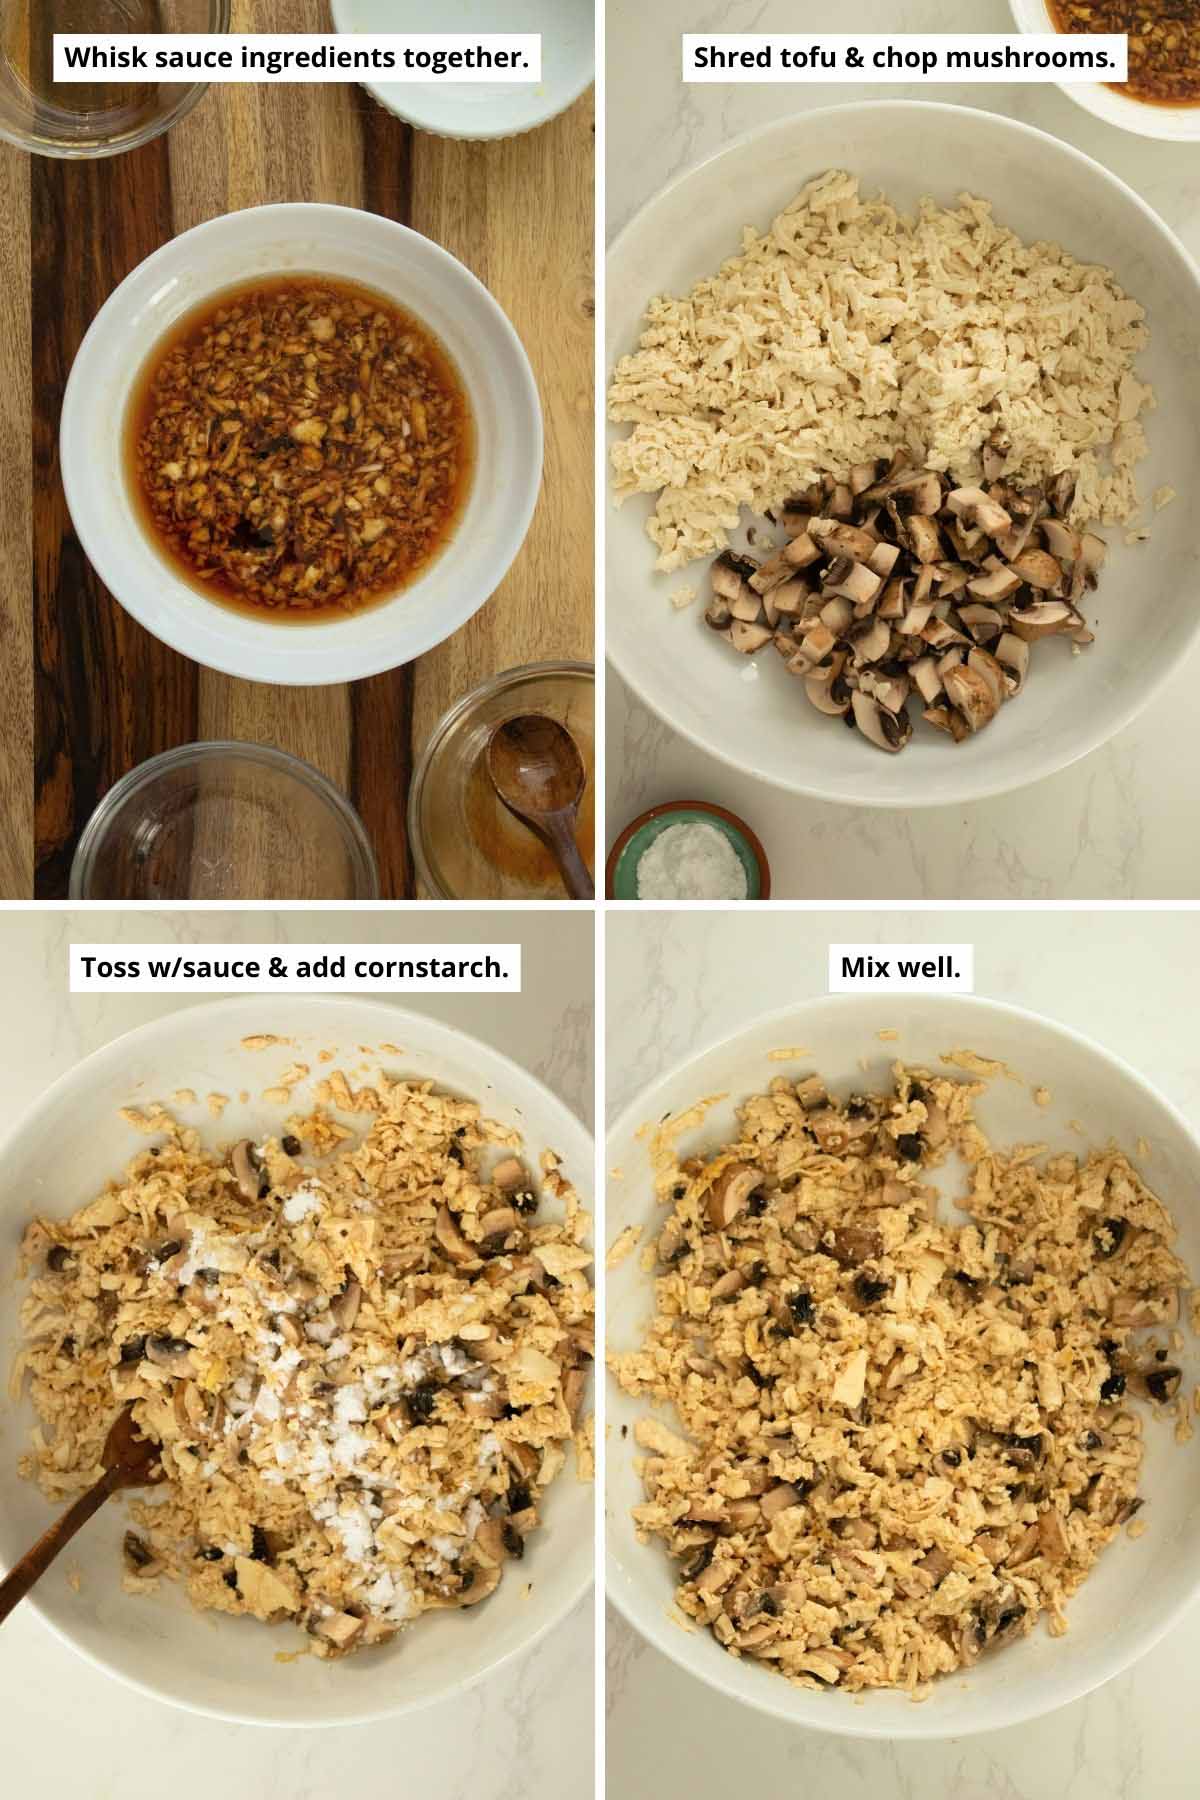 image collage showing the sauce mixed together, the tofu and mushrooms in a mixing bowl before and after mixing in the cornstarch